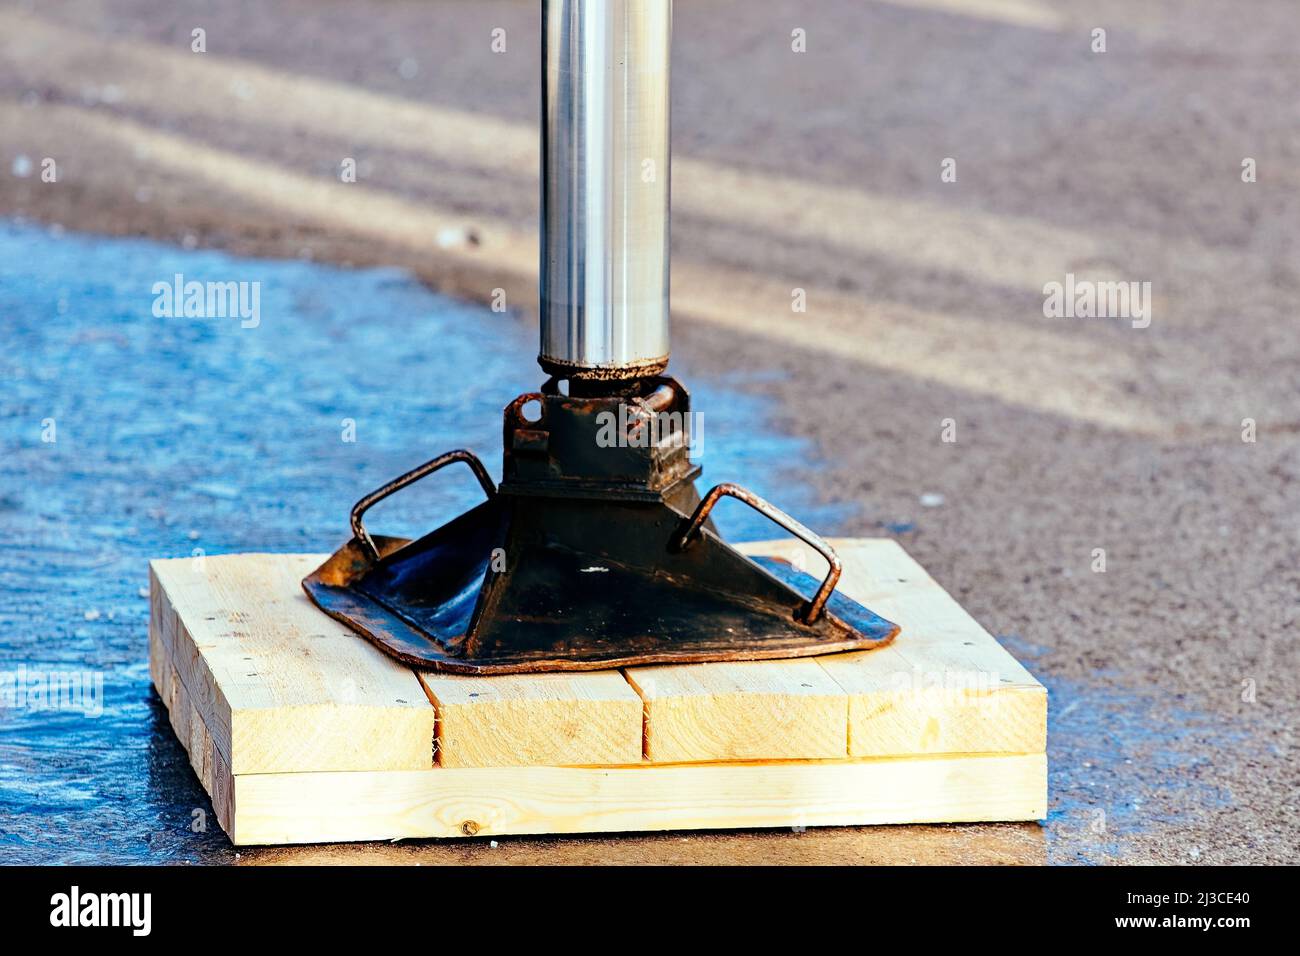 Hydraulic platform or strut struts of lifting mechanism. Part of equipment for lifting loads. background Stock Photo